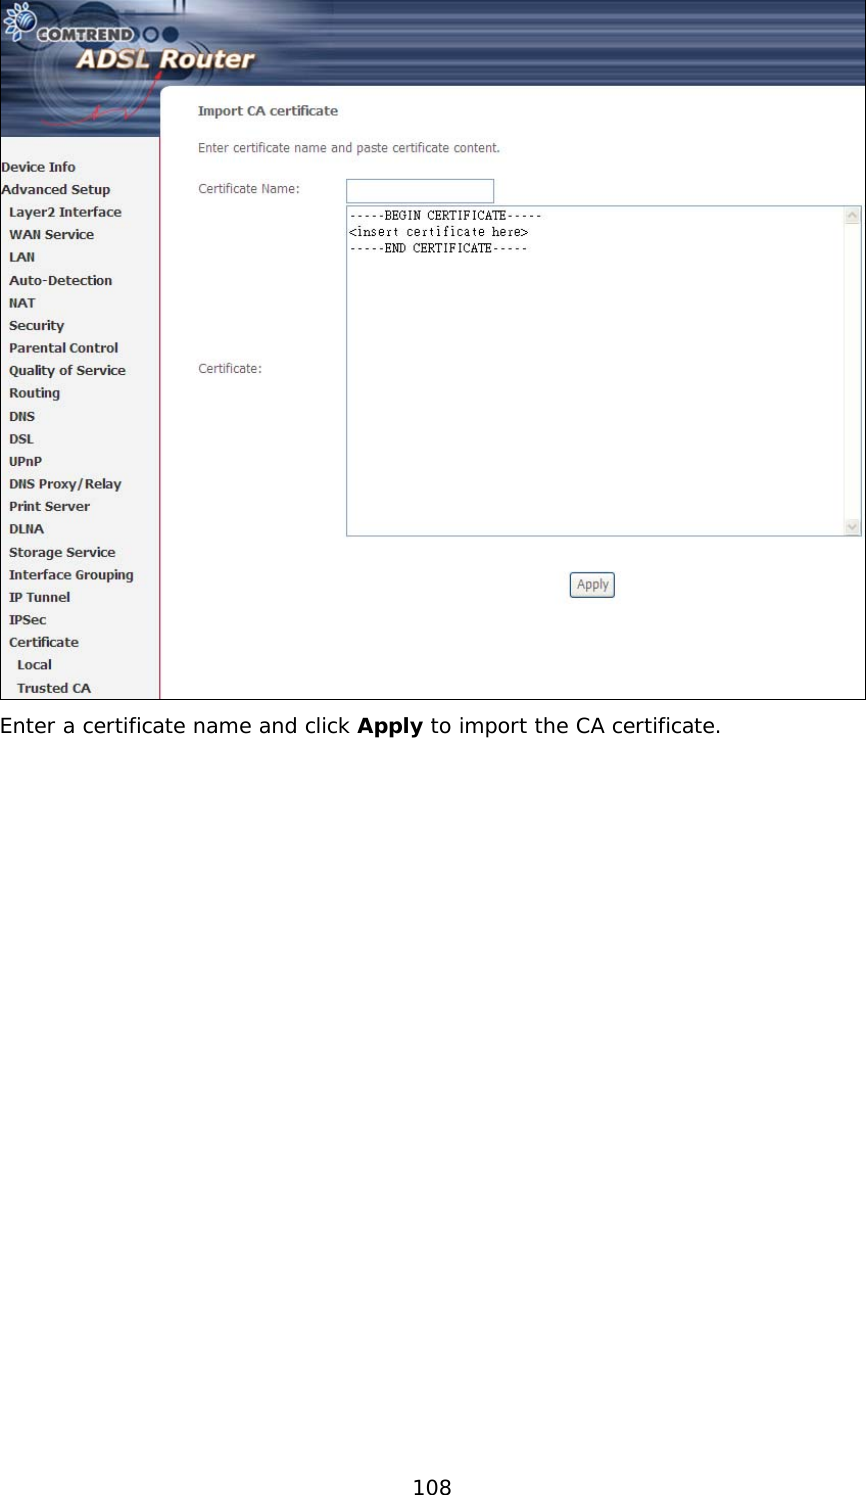  108  Enter a certificate name and click Apply to import the CA certificate. 